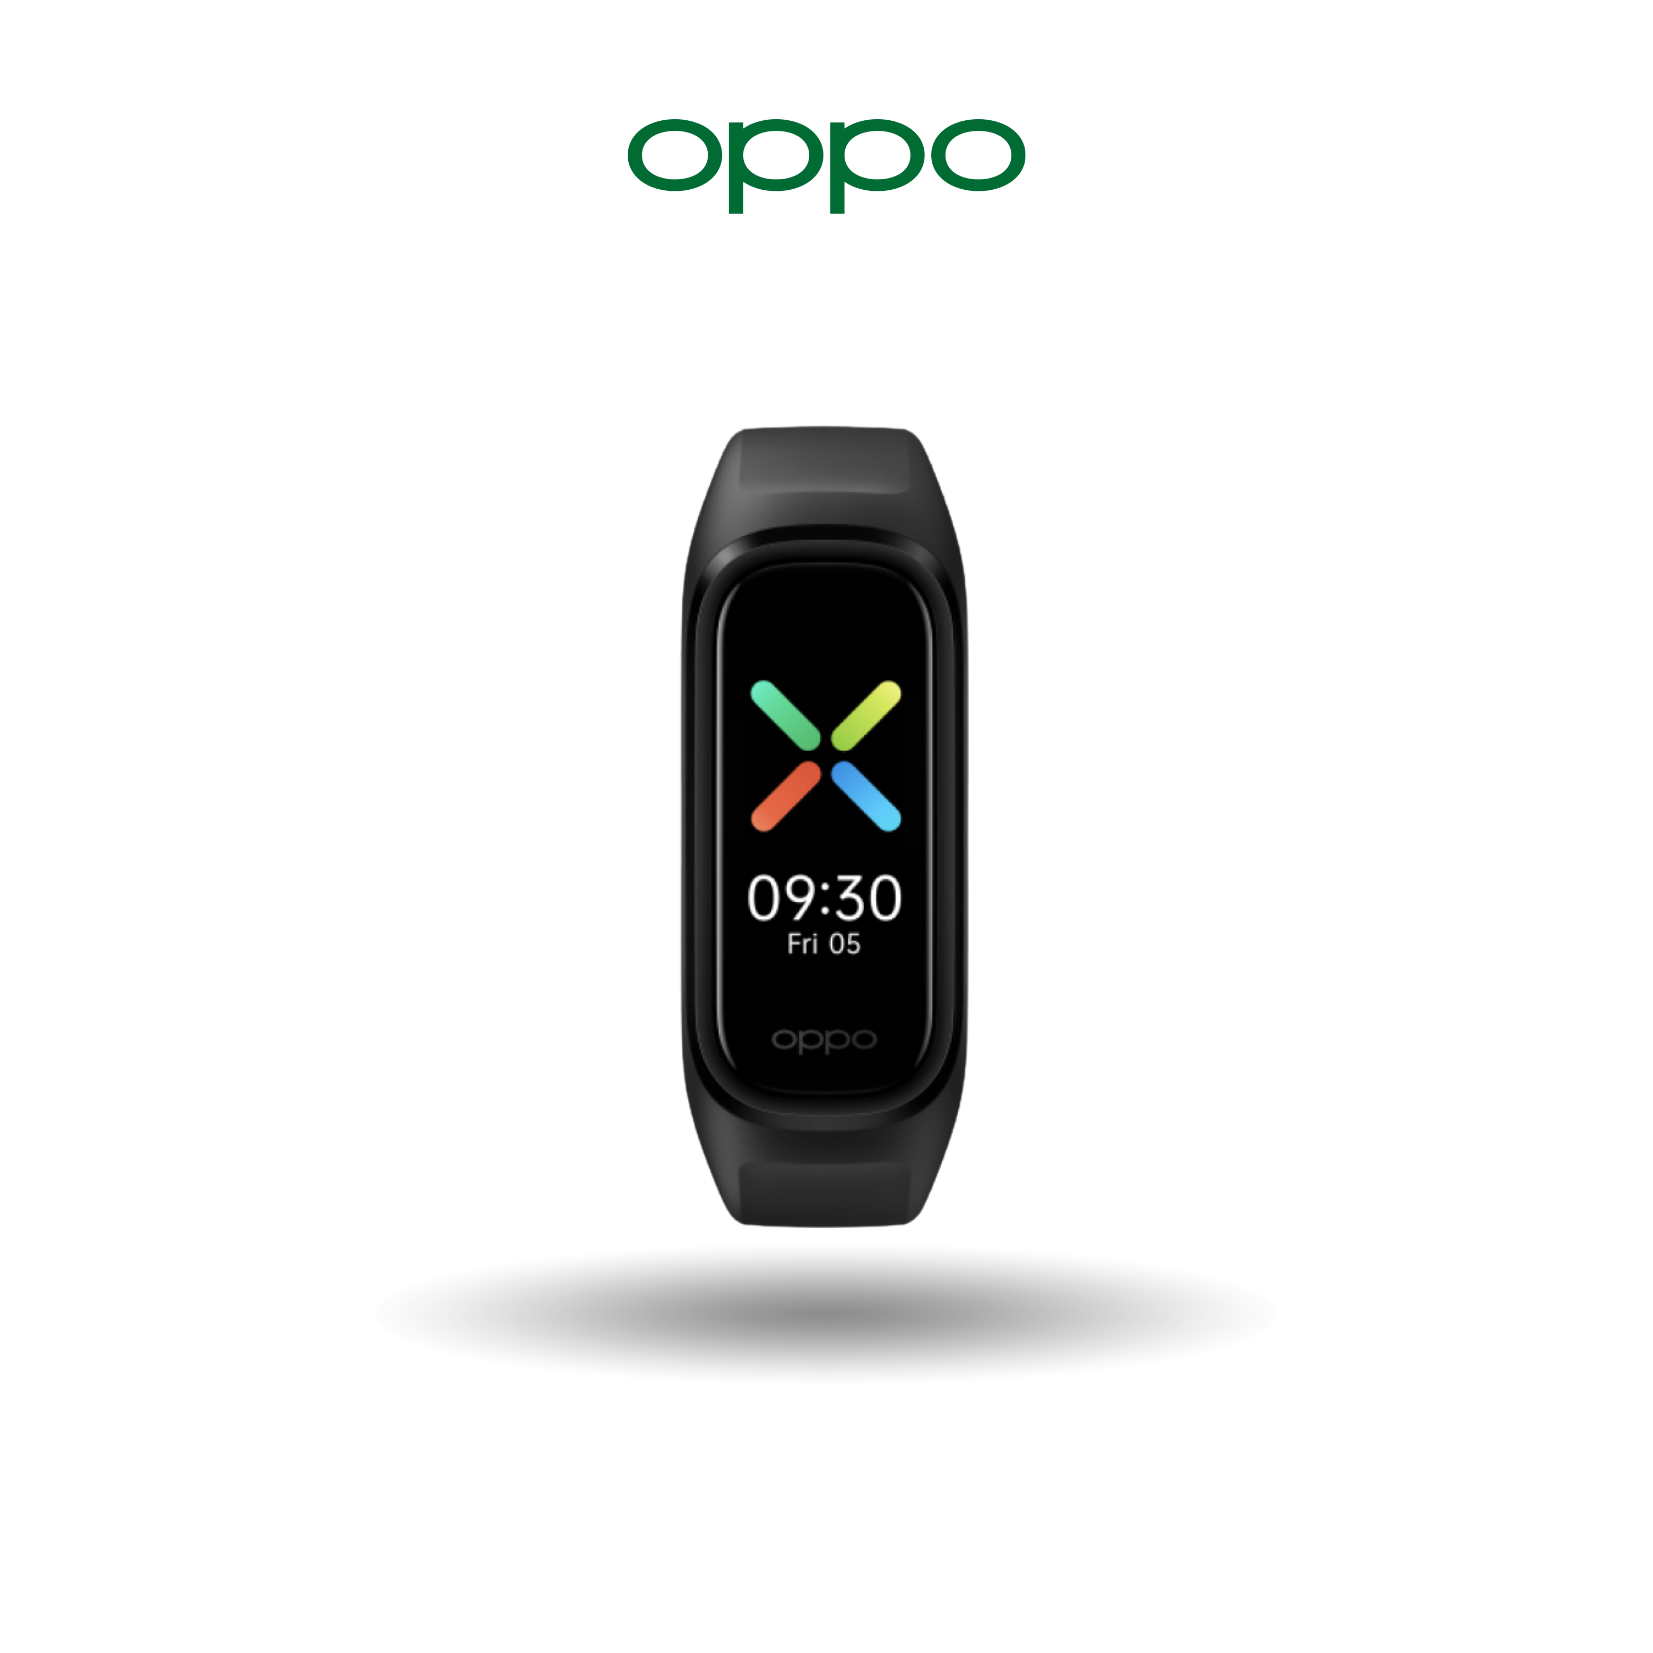 Oppo Band - 1.1 Inch AMOLED Display | 12 Exercise Modes | 50 Meter Water Resistance